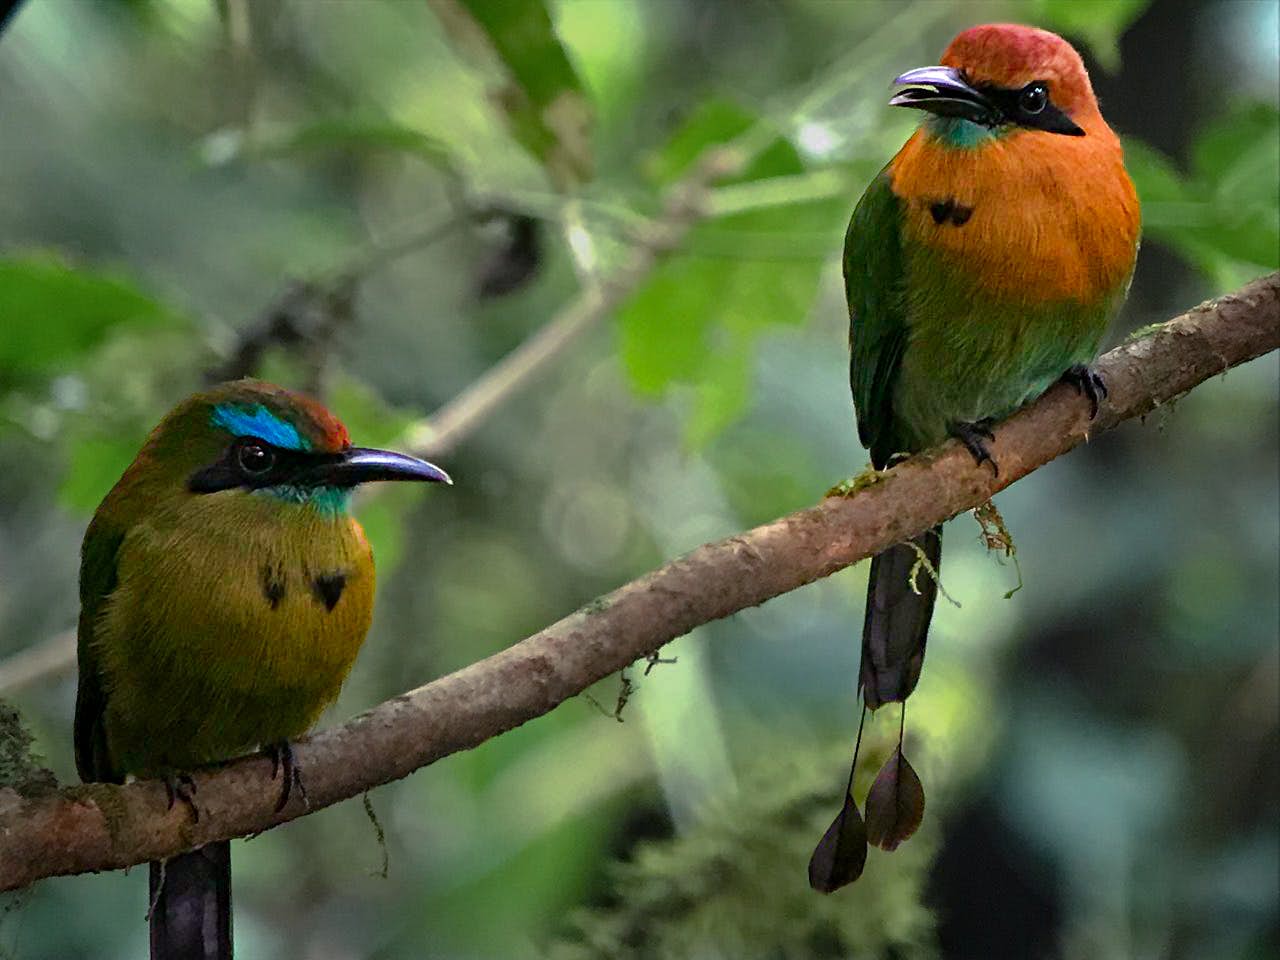 Bird Watching in Mistico Park: A Tropical Paradise